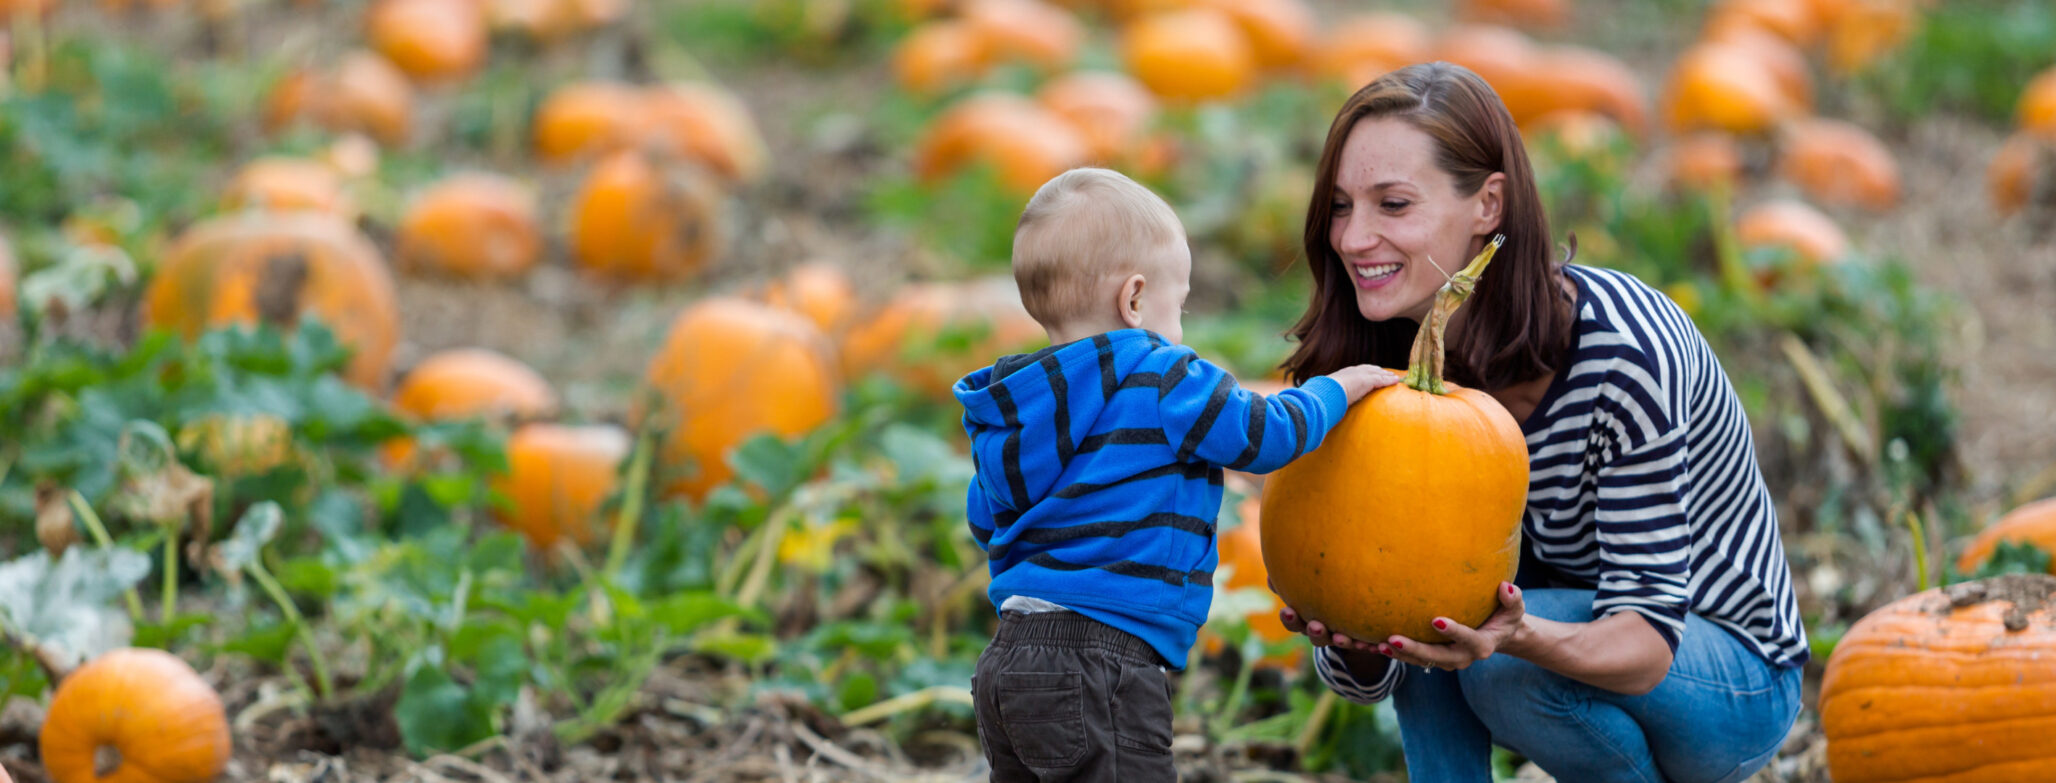 pumpkin patch risks and how to mitigate them